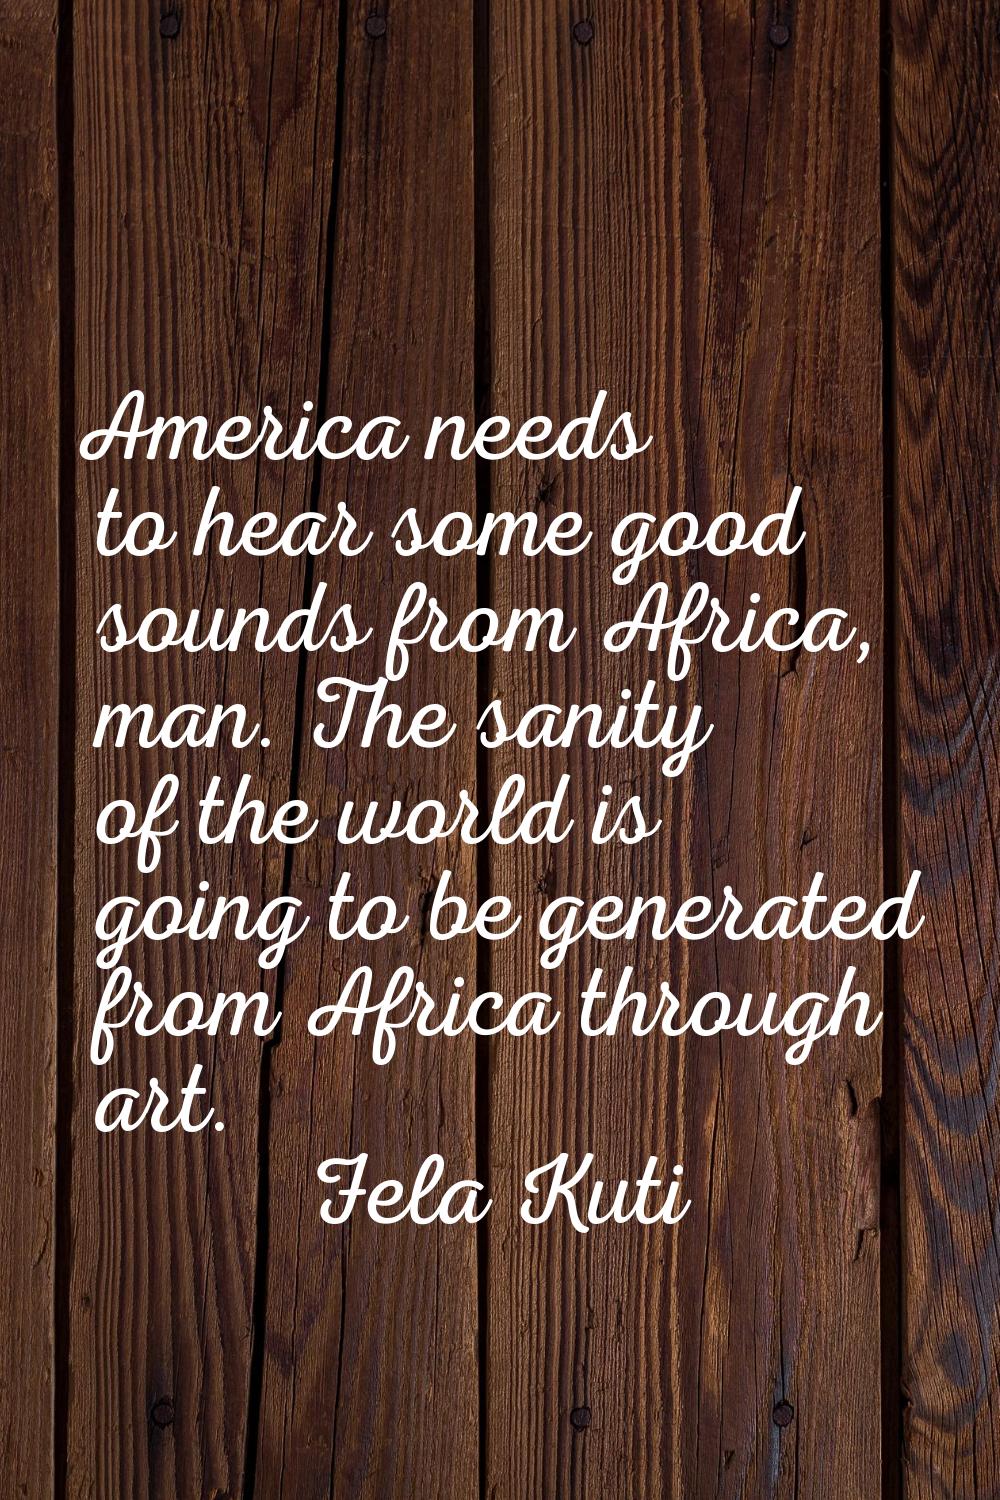 America needs to hear some good sounds from Africa, man. The sanity of the world is going to be gen